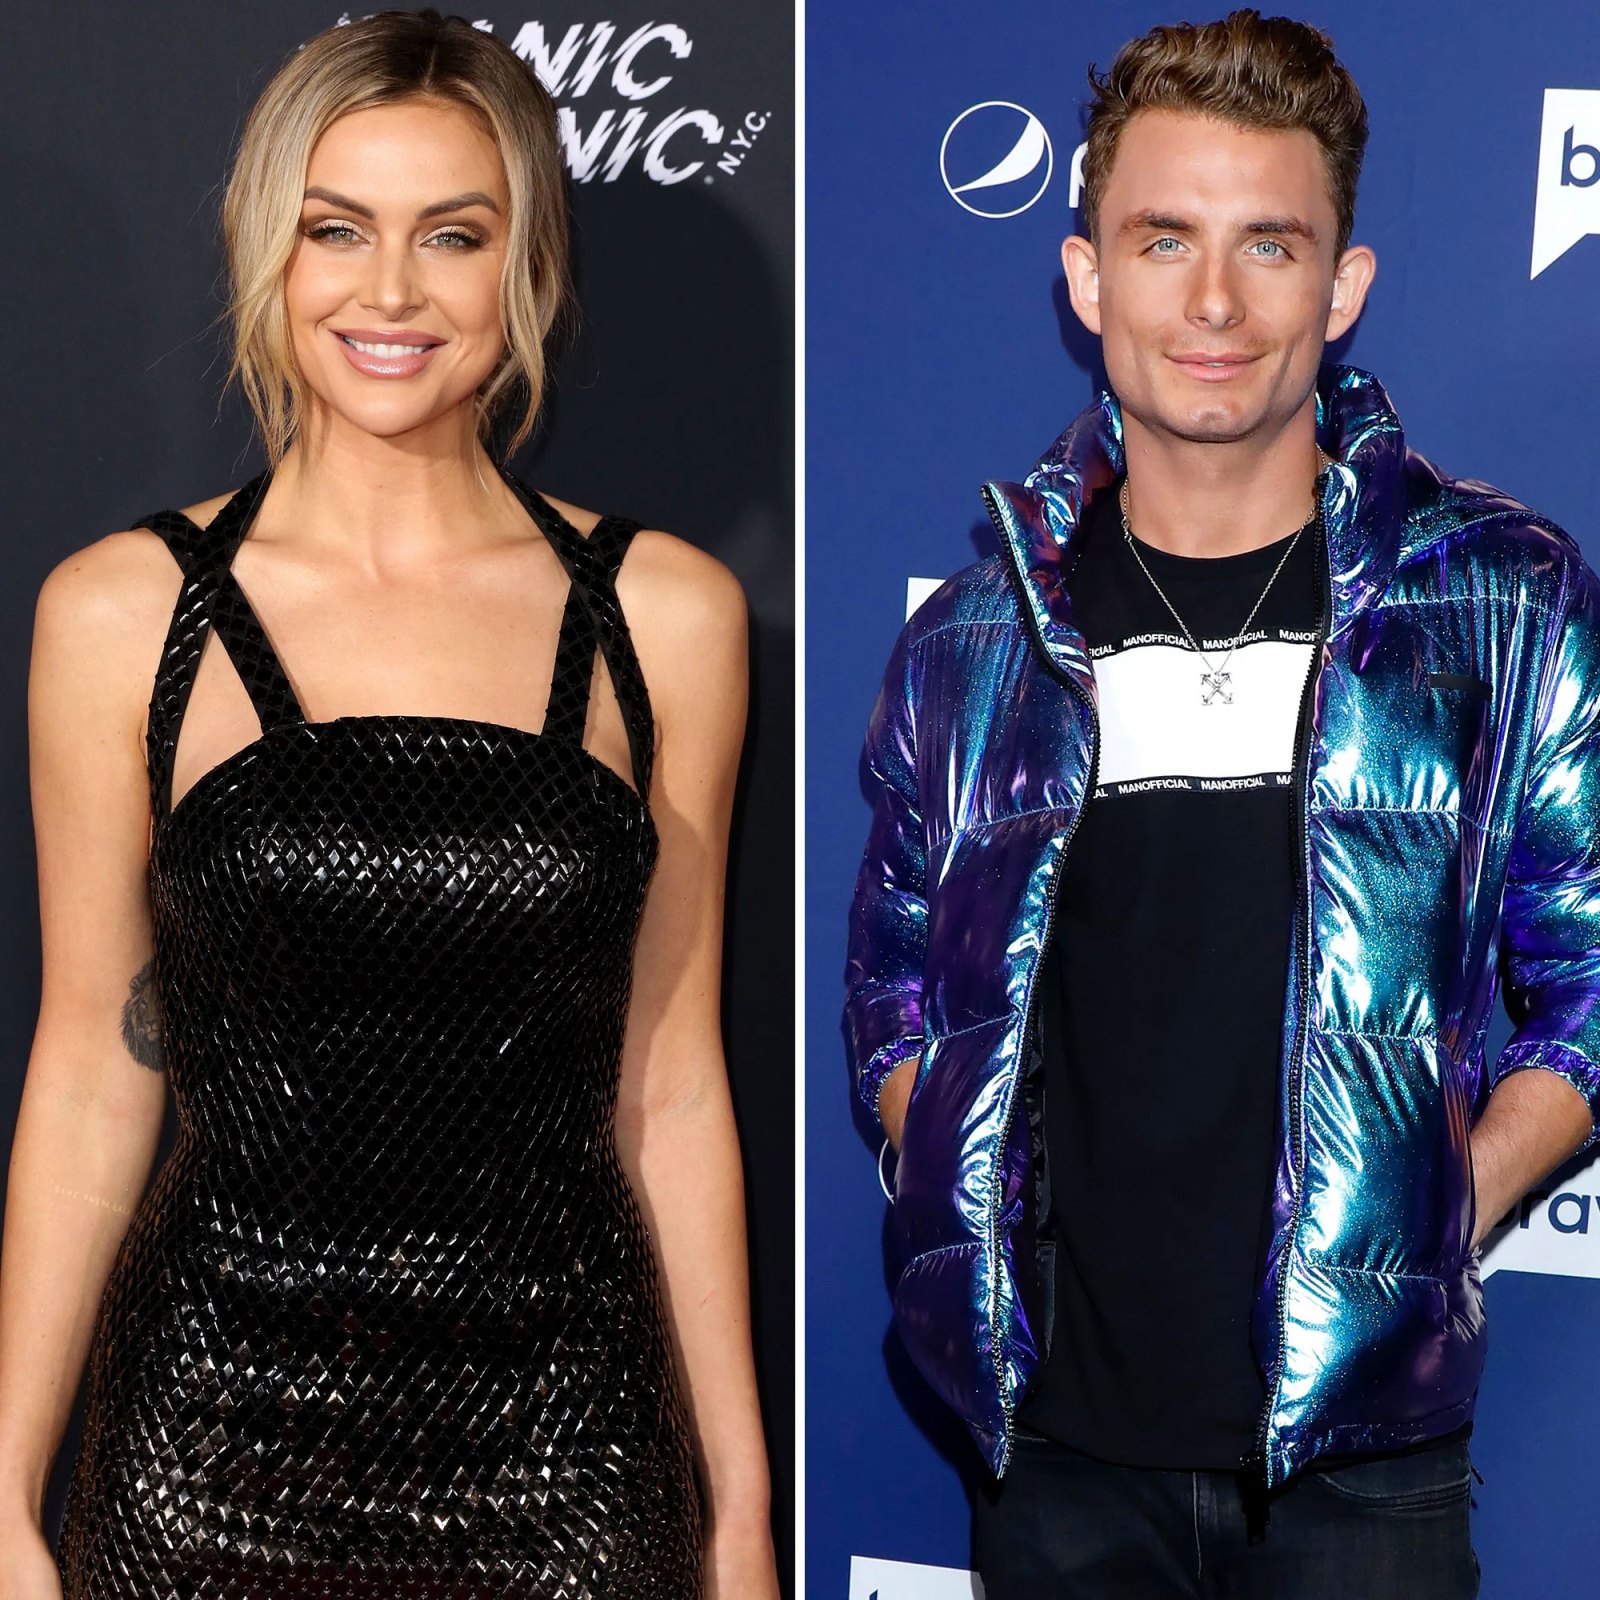 Lala Kent Clarifies Comments About James Kennedy’s Girlfriend Being Forgettable as Pump Rules Cast Weighs In